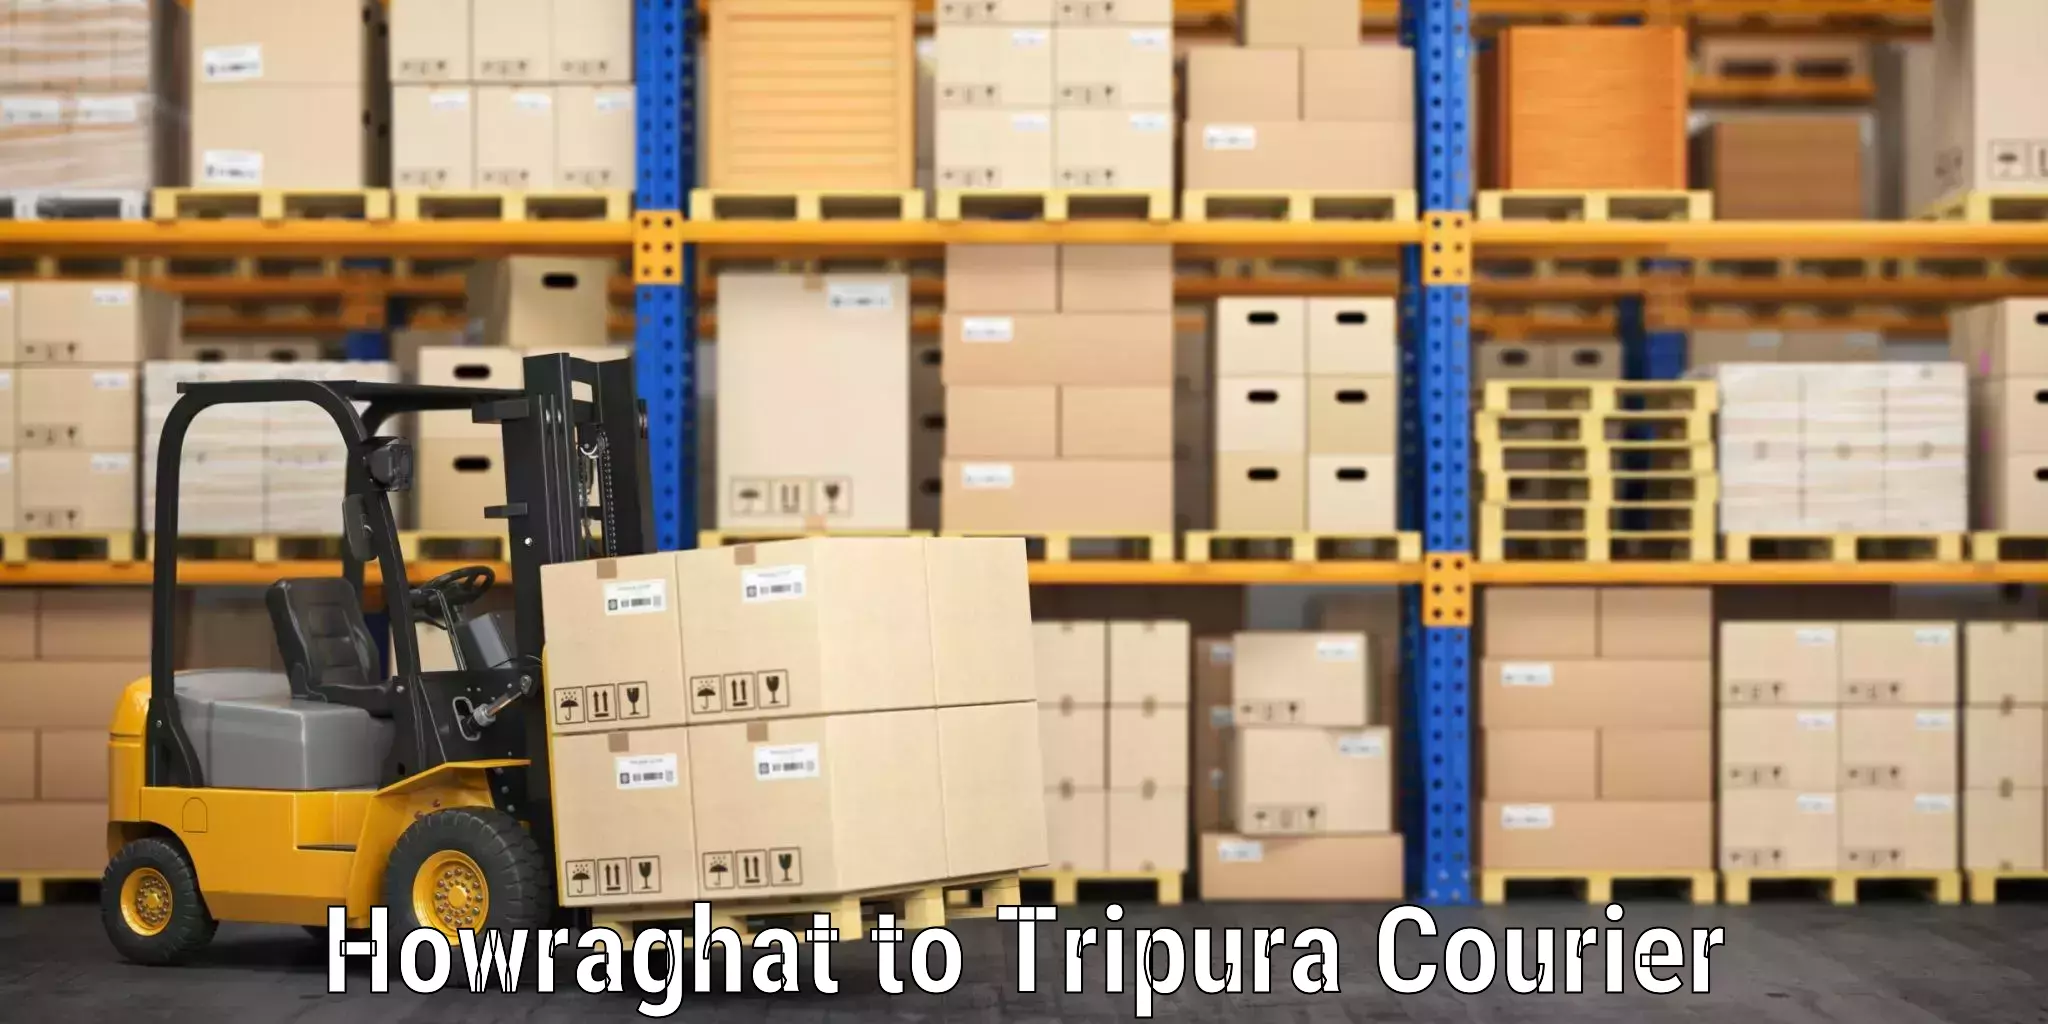 Hassle-free luggage shipping Howraghat to North Tripura